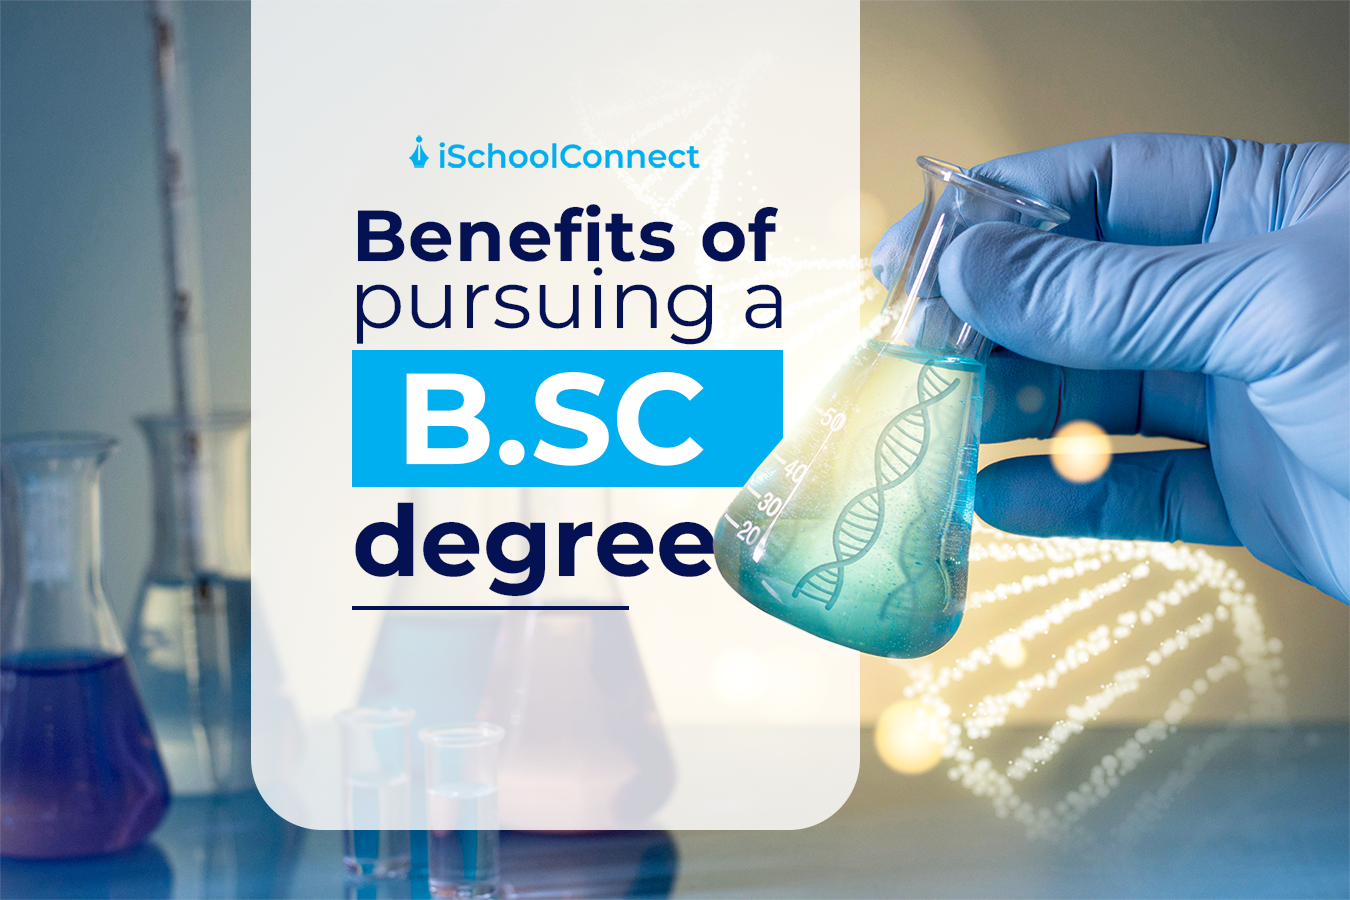 BSc Course